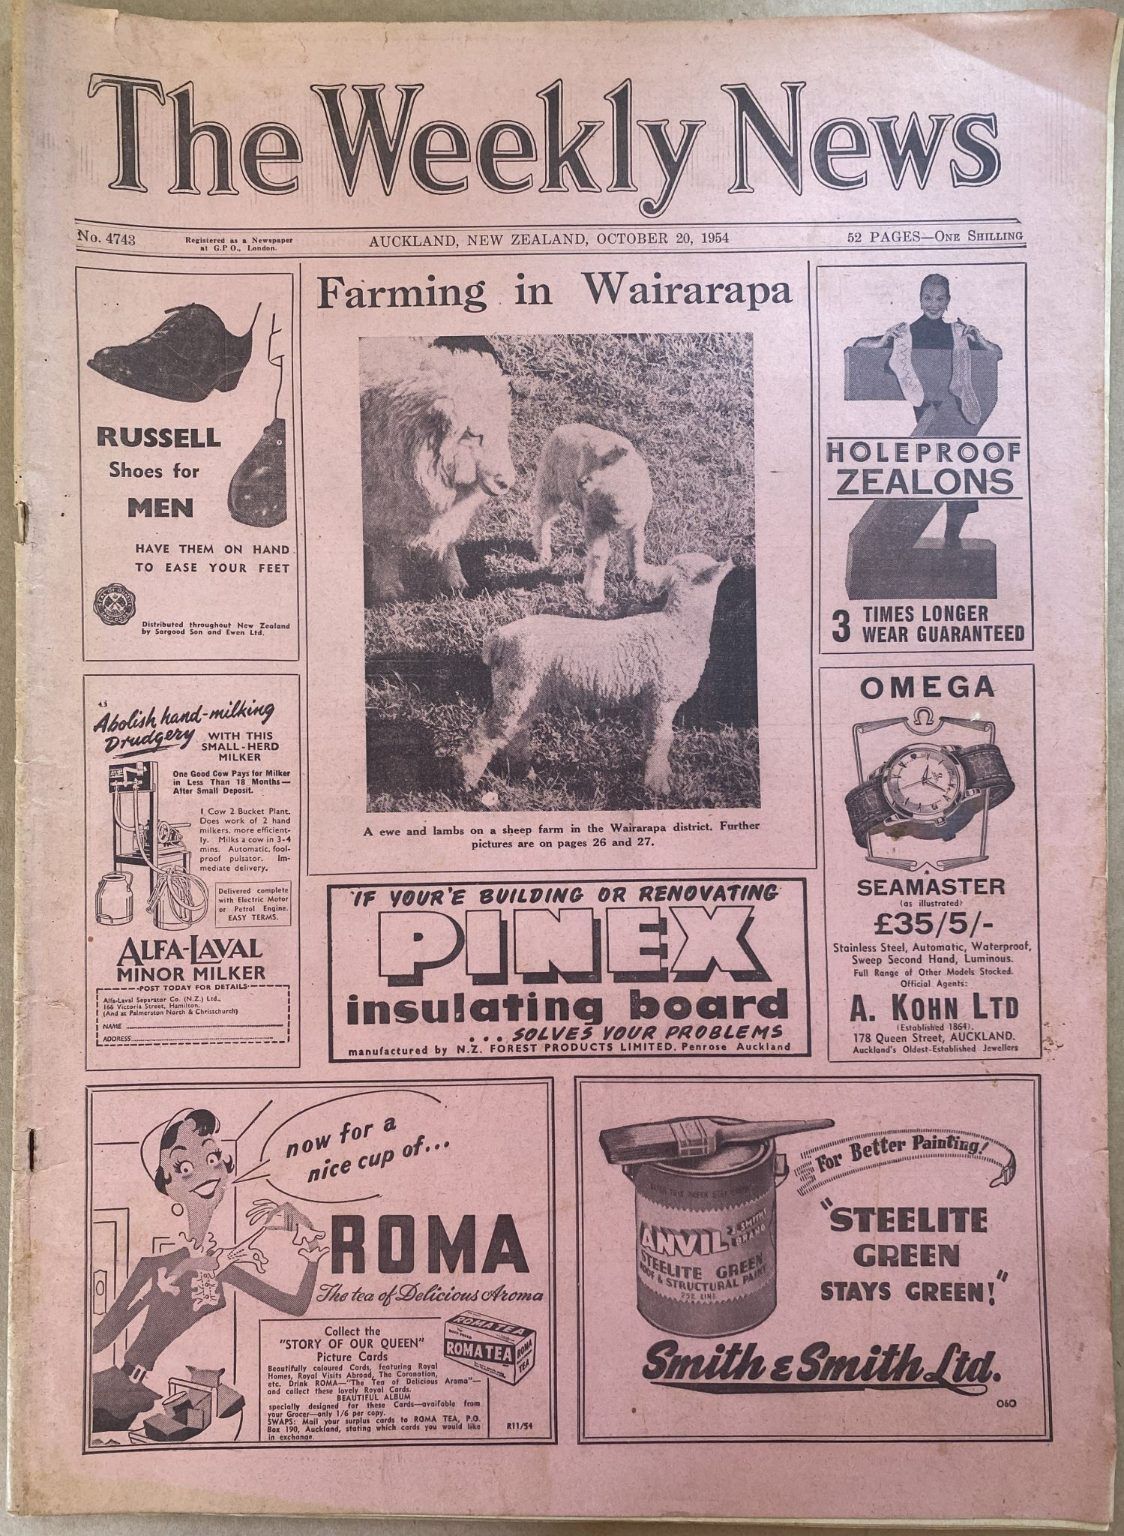 OLD NEWSPAPER: The Weekly News - No. 4743, 20 October 1954